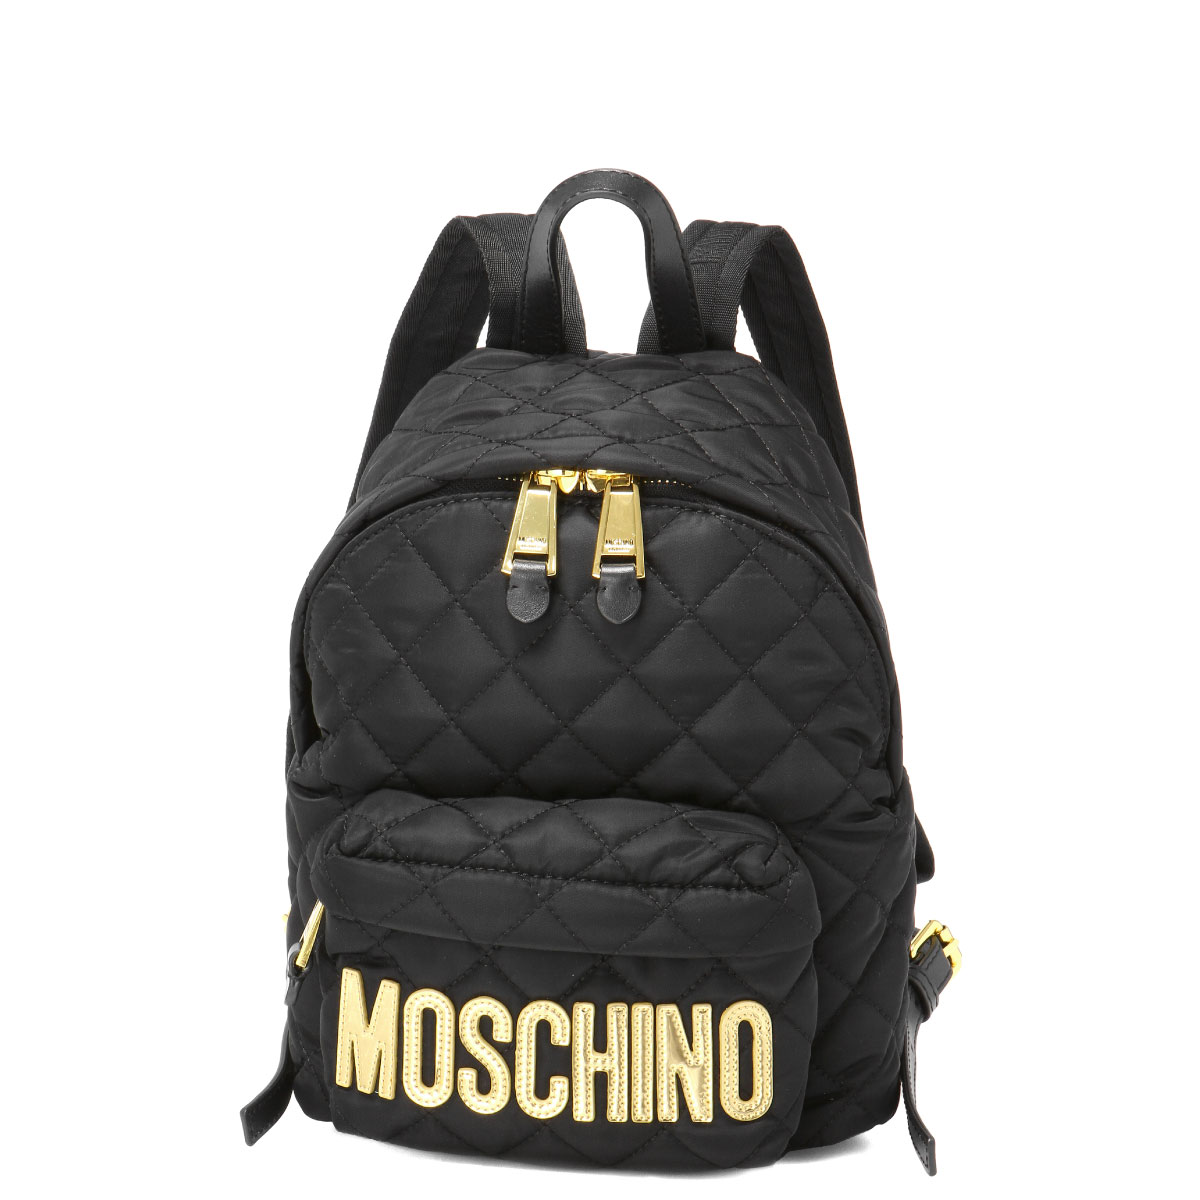 importshopdouble: Moschino MOSCHINO bag lady B7608 8201 2555 backpack ...